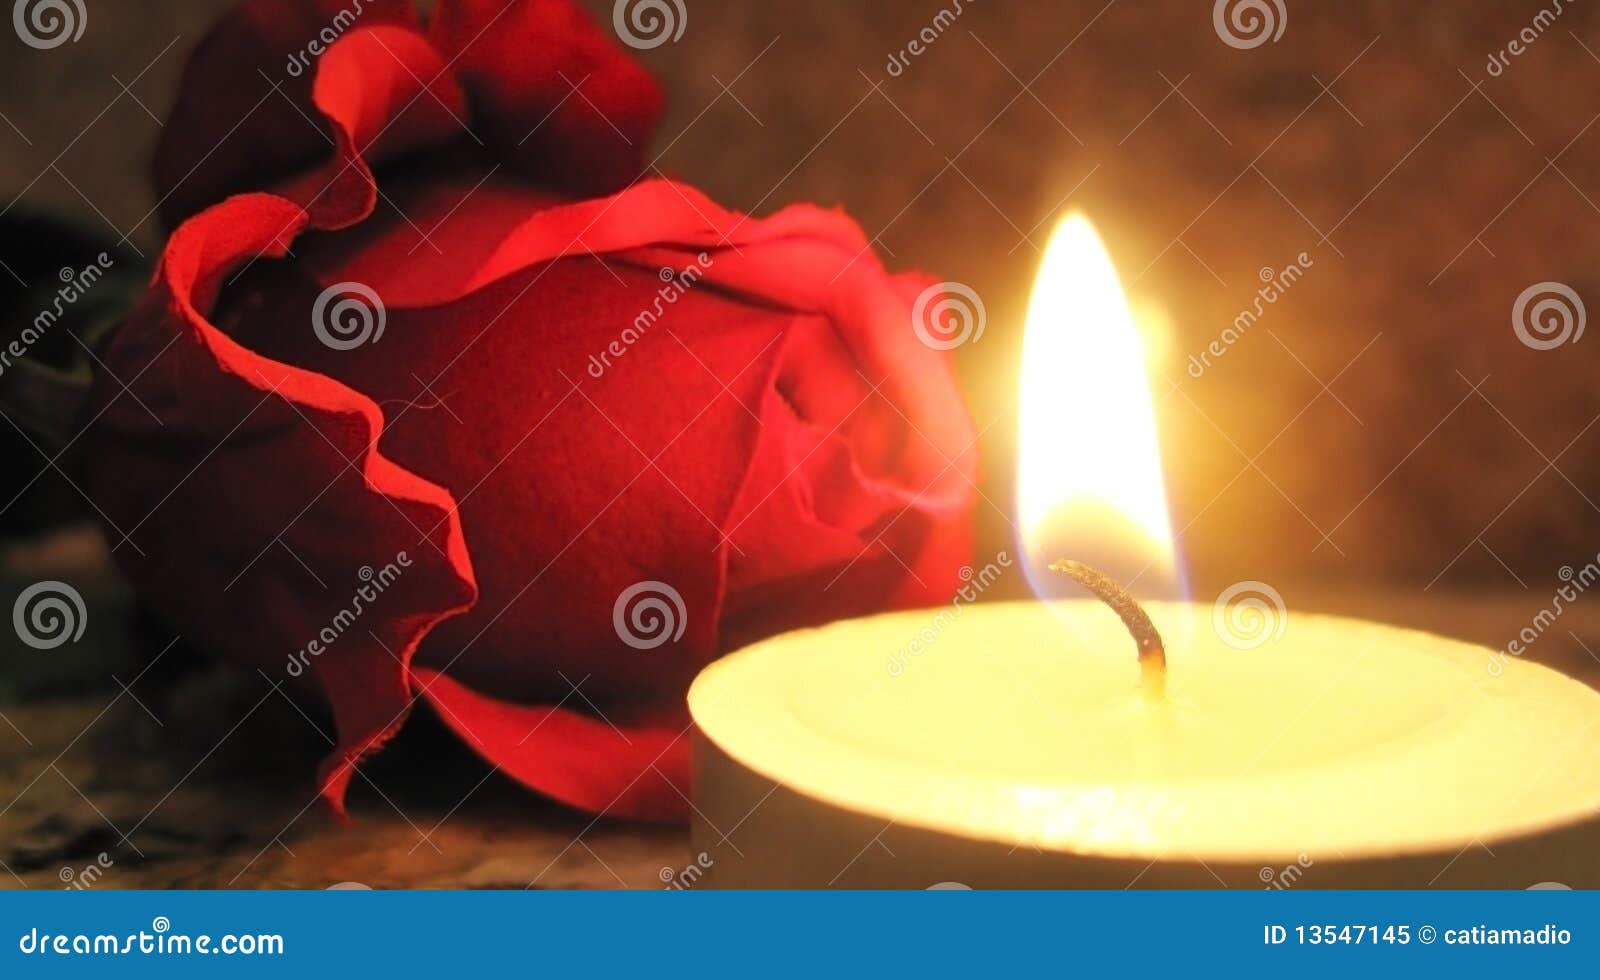 rose and candle